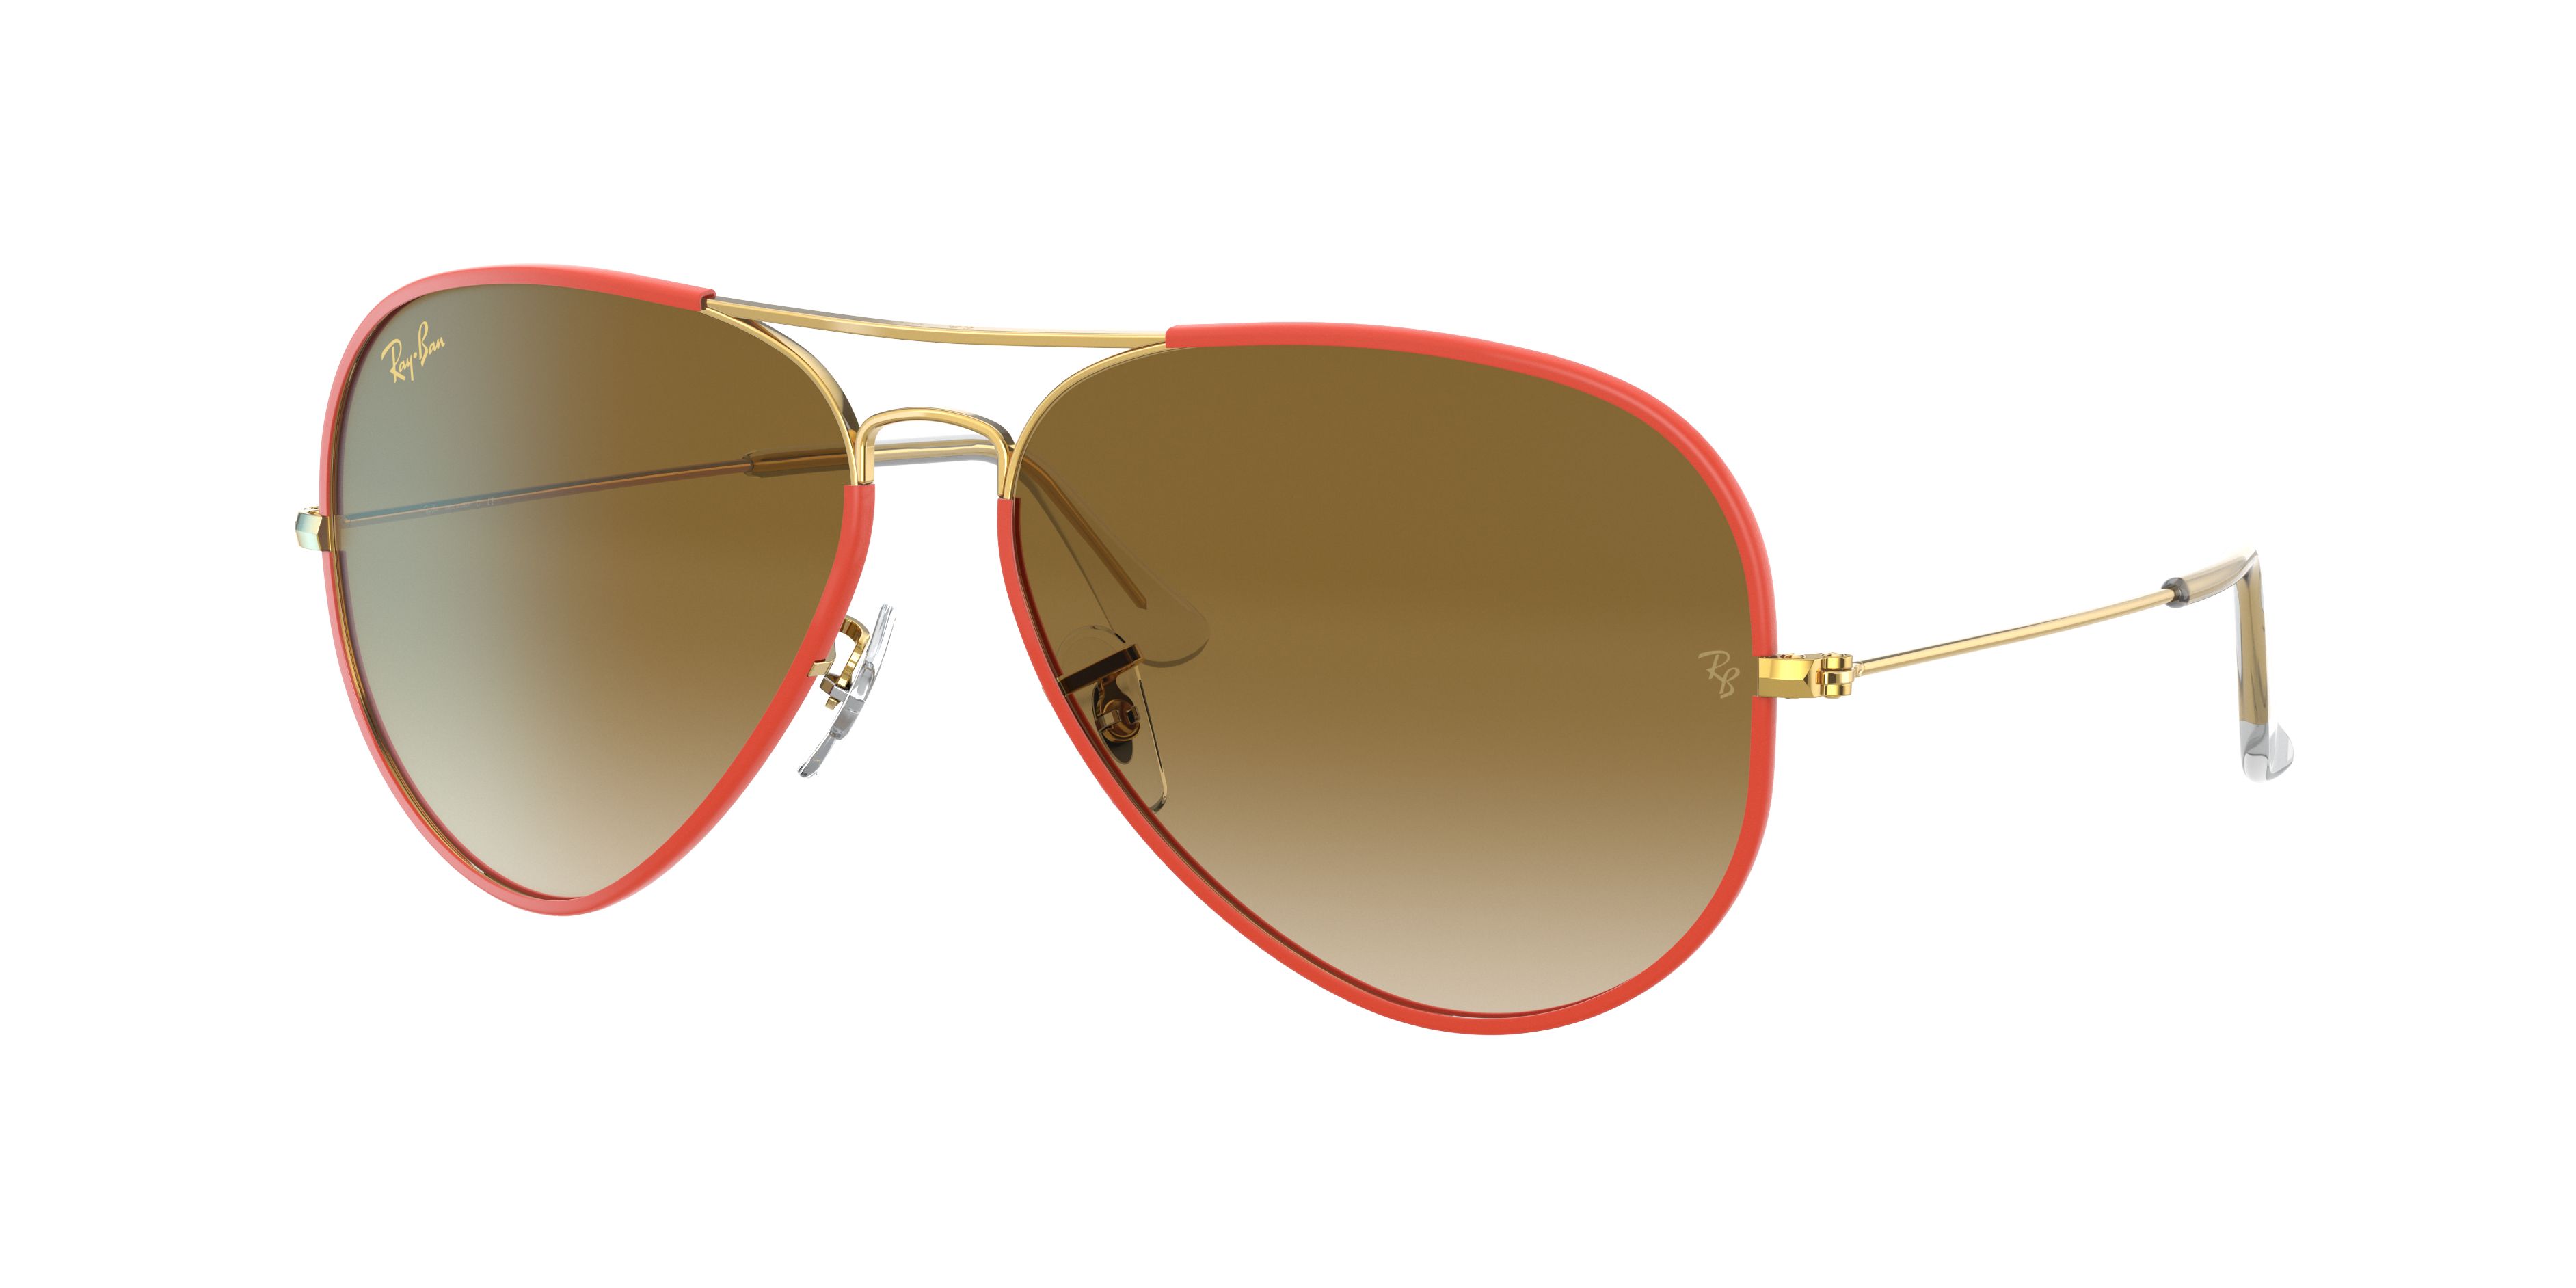 Check out the Aviator Full Color Legend at ray-ban.com | Ray-Ban (US)